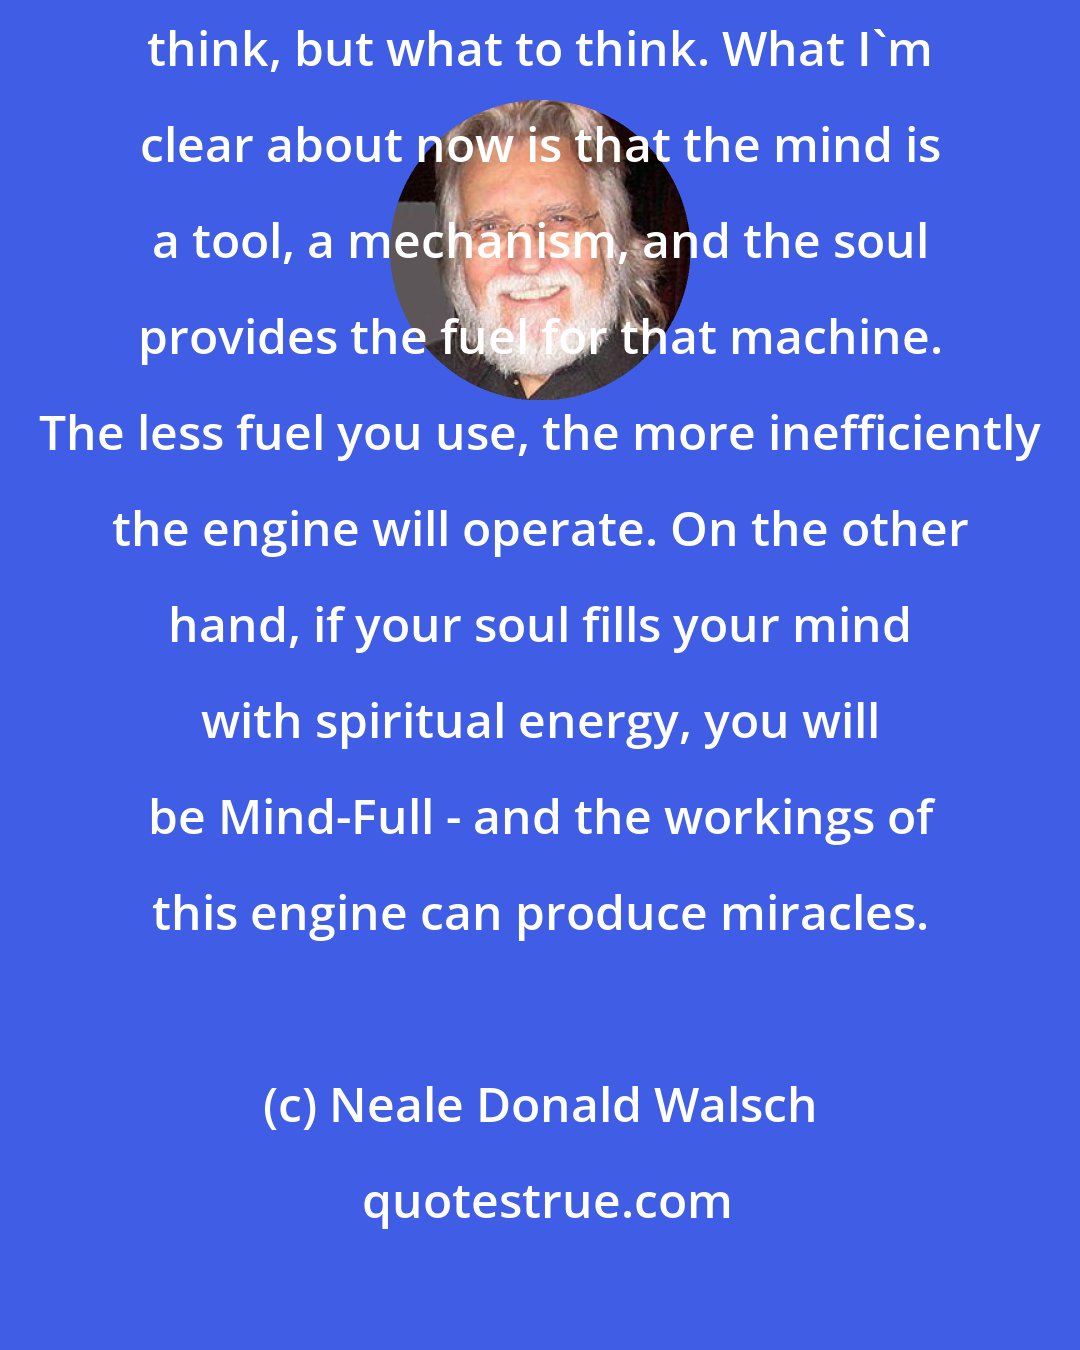 Neale Donald Walsch: By mastering both aspects of our being we remember not only how to think, but what to think. What I'm clear about now is that the mind is a tool, a mechanism, and the soul provides the fuel for that machine. The less fuel you use, the more inefficiently the engine will operate. On the other hand, if your soul fills your mind with spiritual energy, you will be Mind-Full - and the workings of this engine can produce miracles.